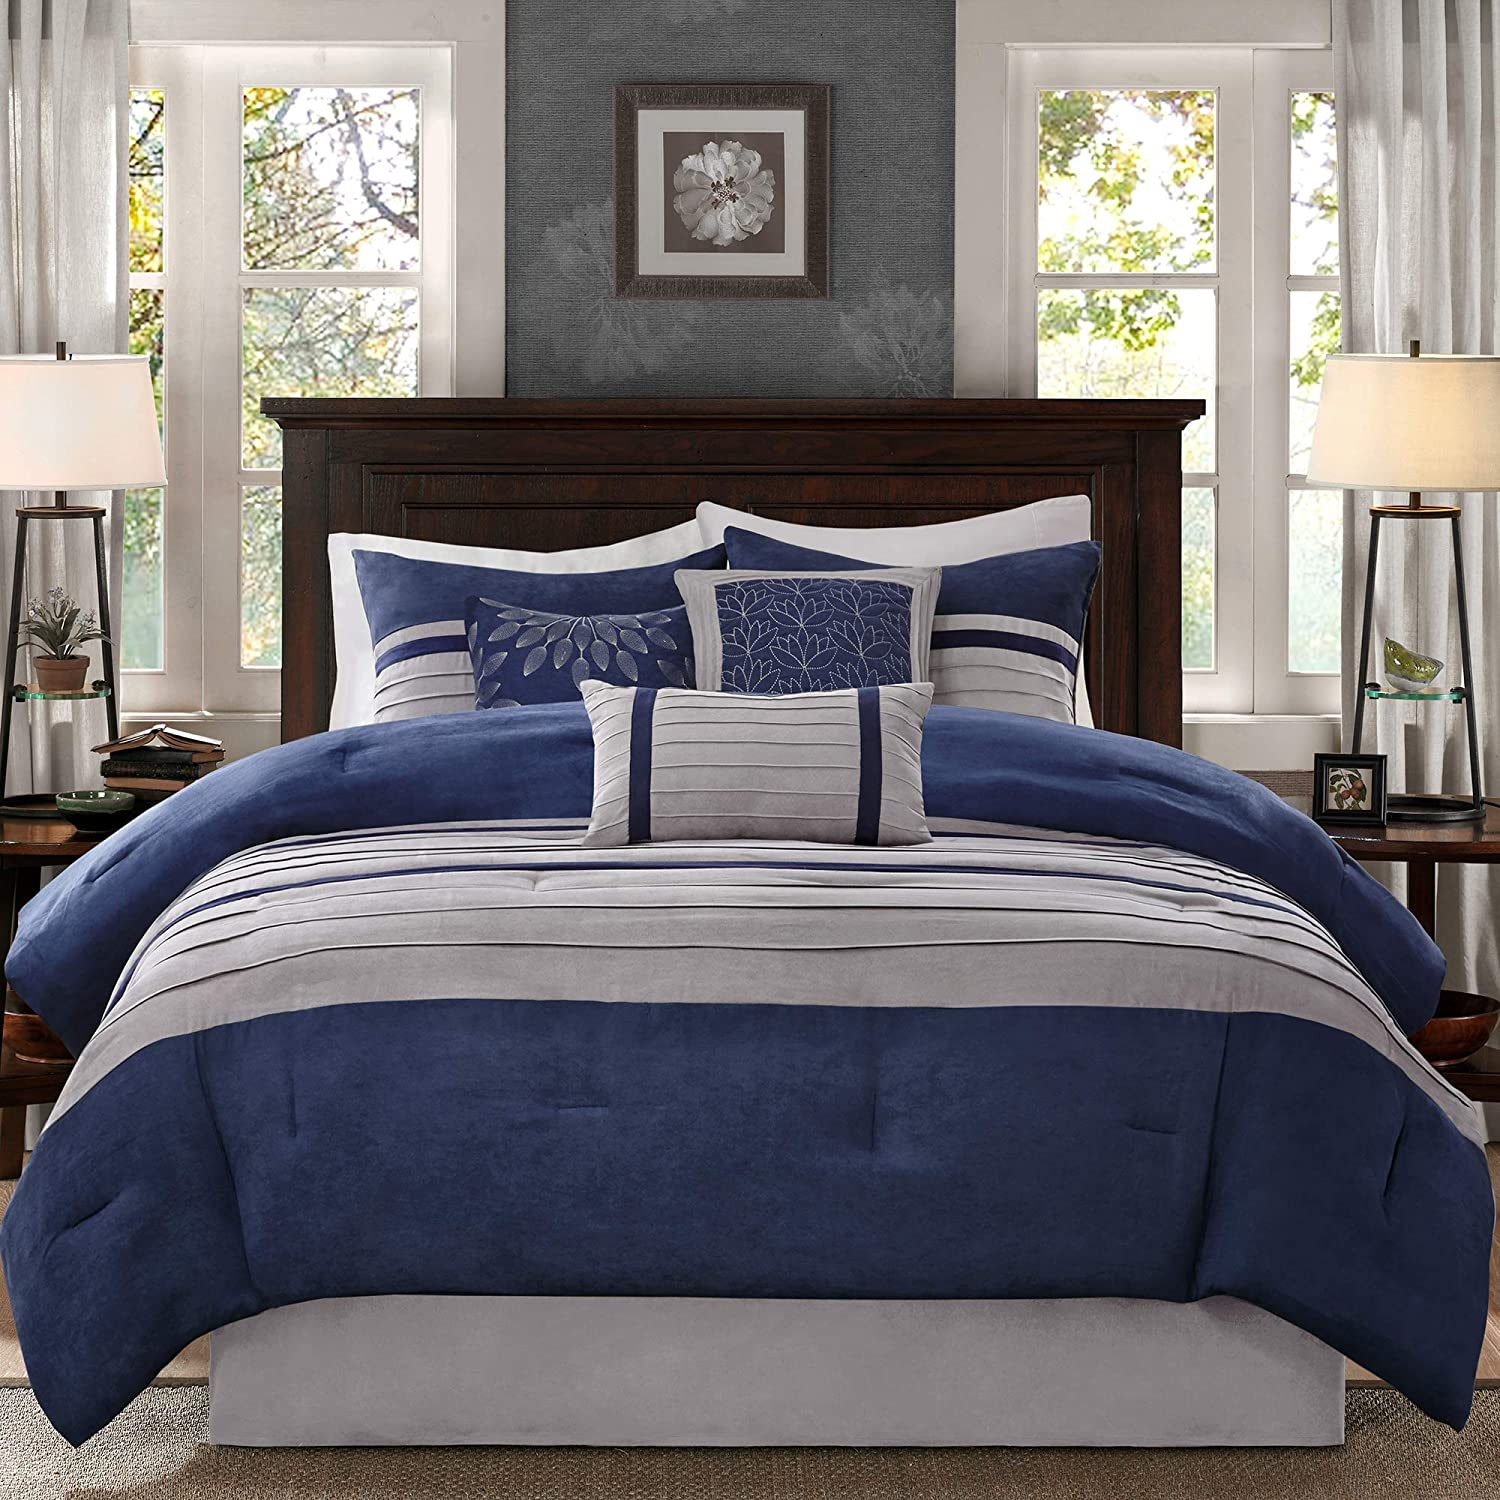 Simple patterned comforters can make a sleigh bed more modern